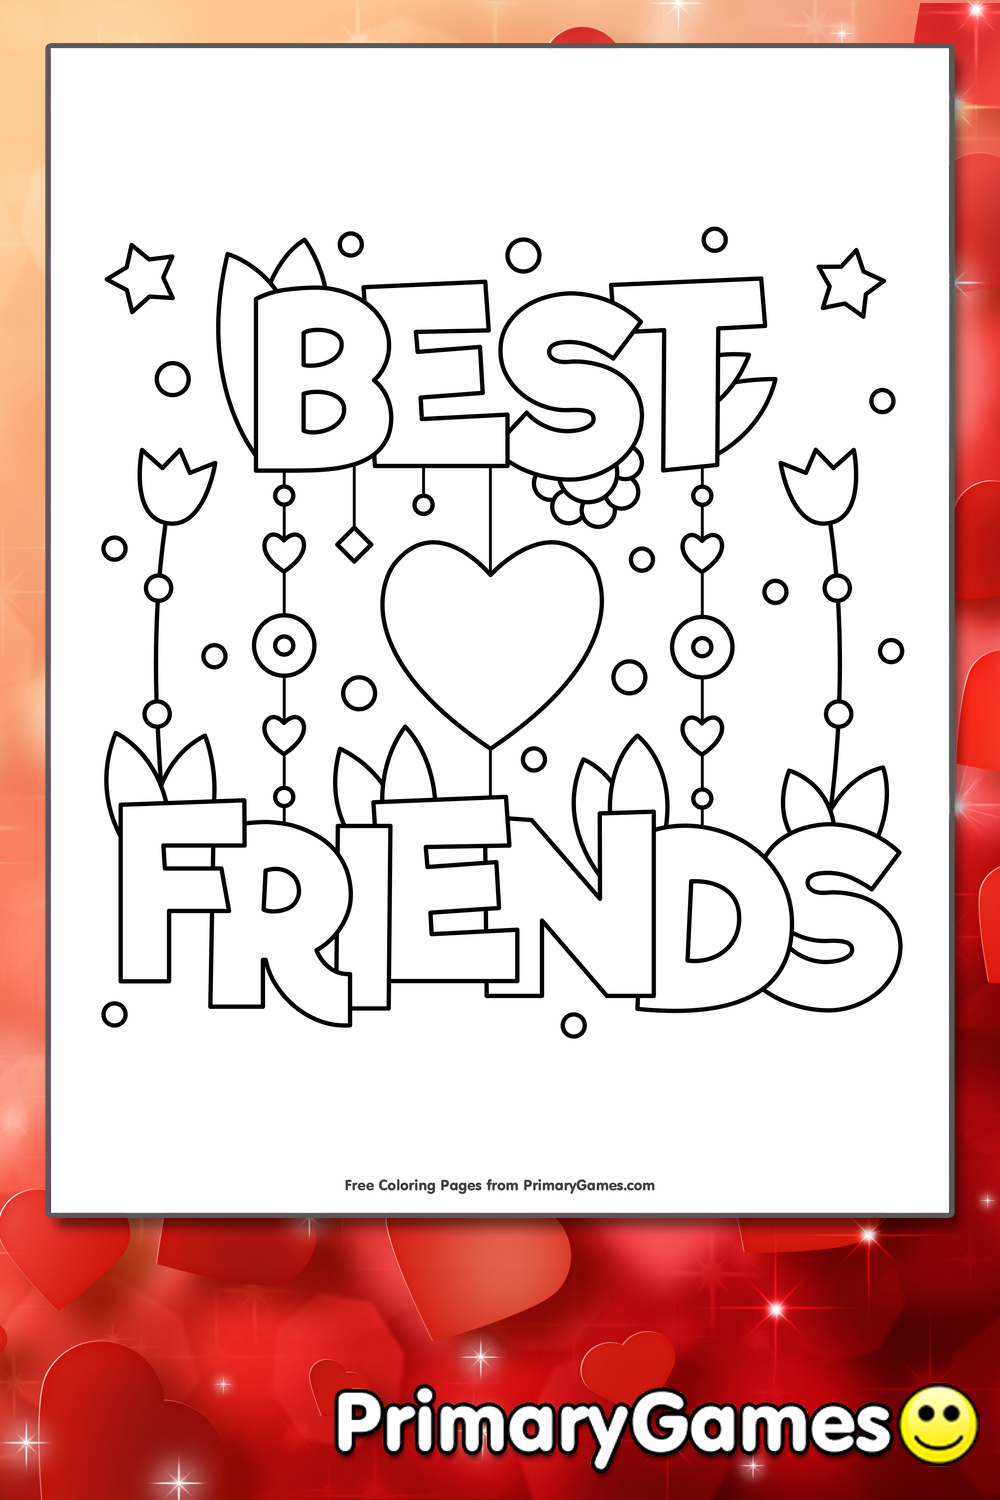 Best Friends Coloring Page • FREE Printable PDF from PrimaryGames